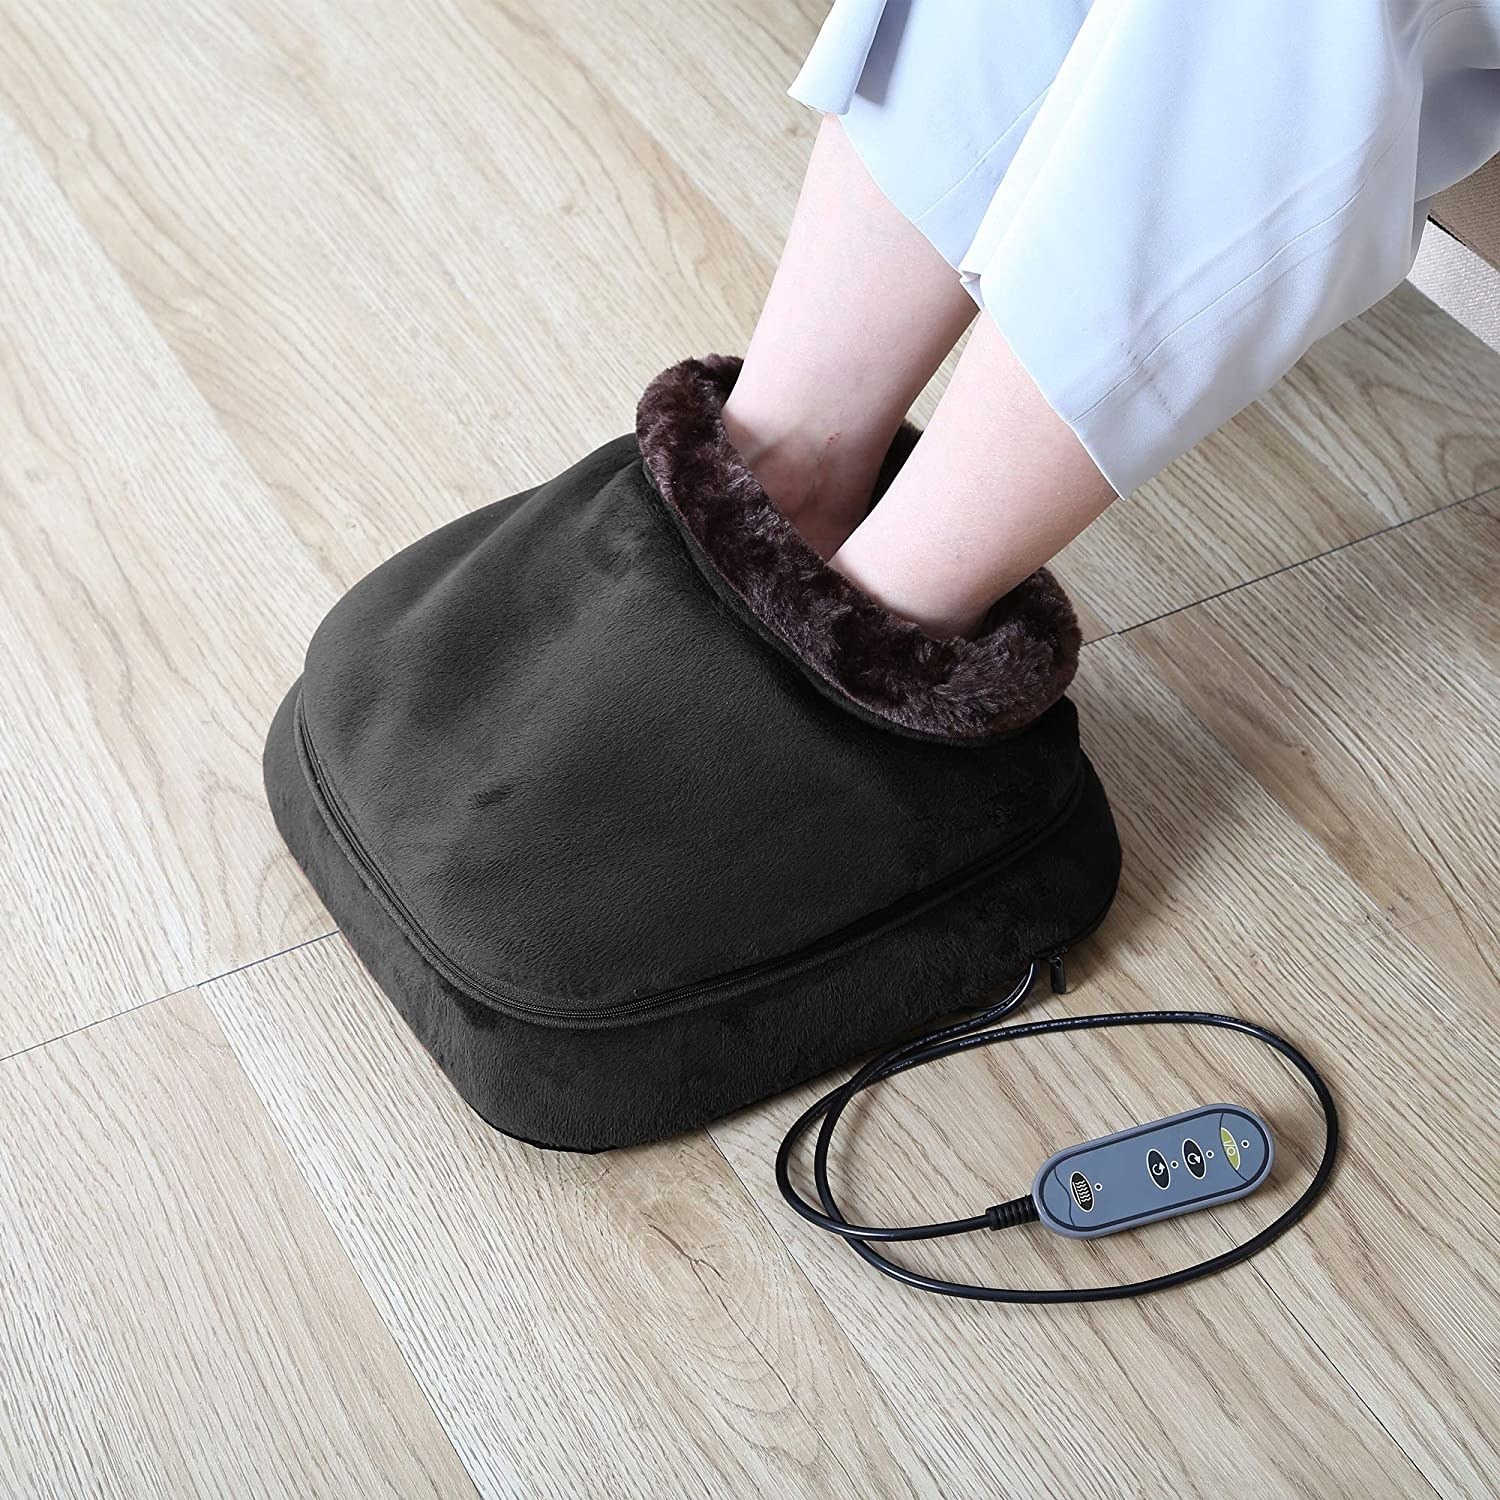 Person with their feet inside a foot warmer